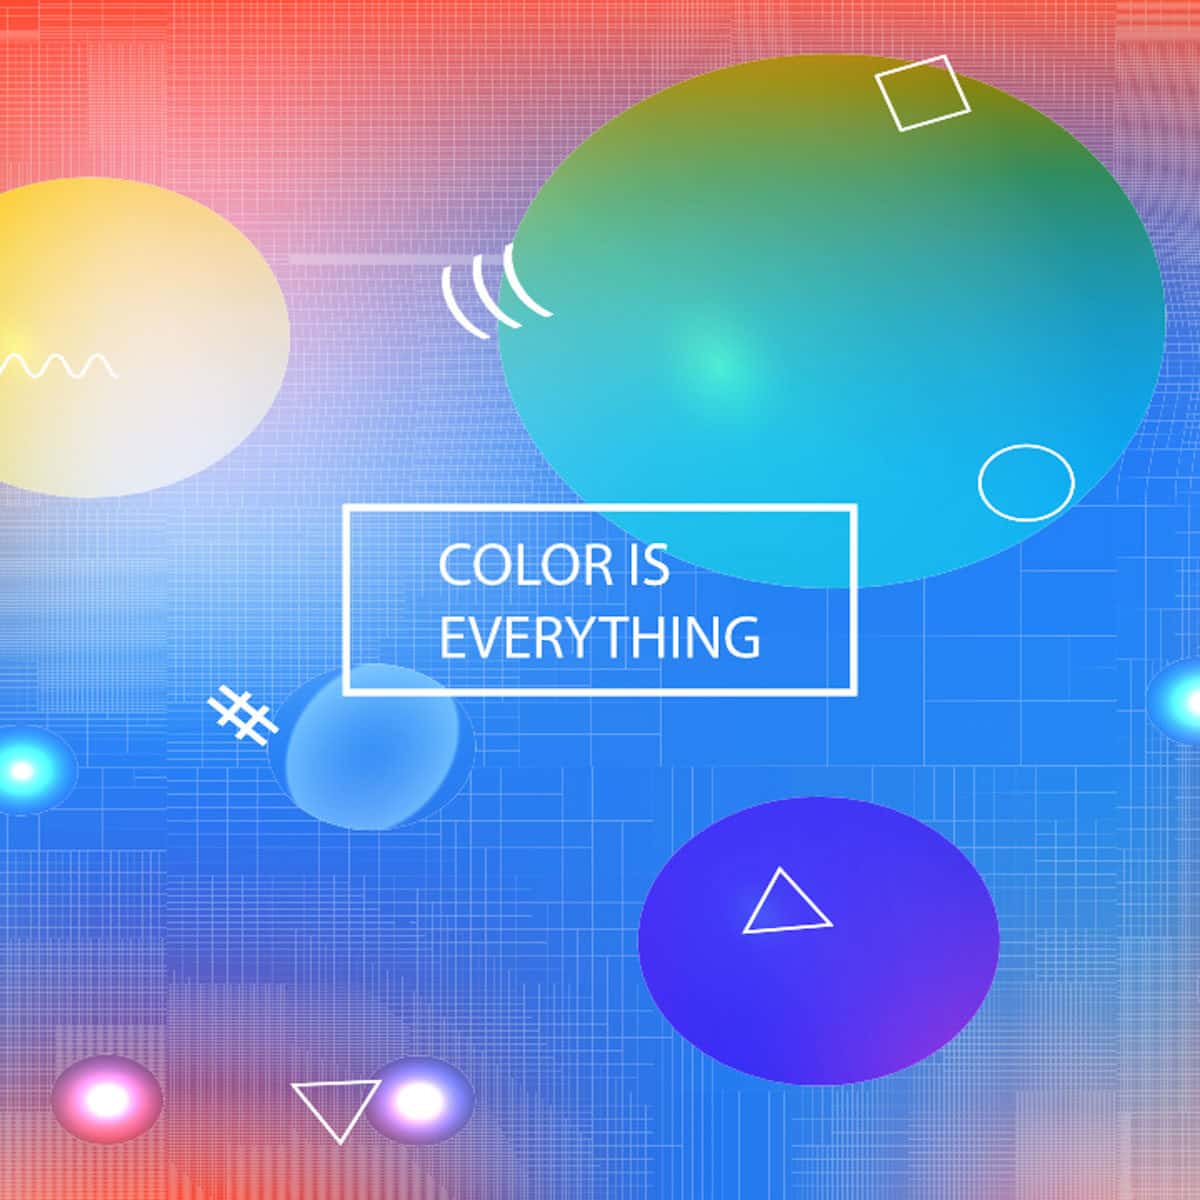 A colorfull cahrt with bubbles and colored gradients saying "color is everything".